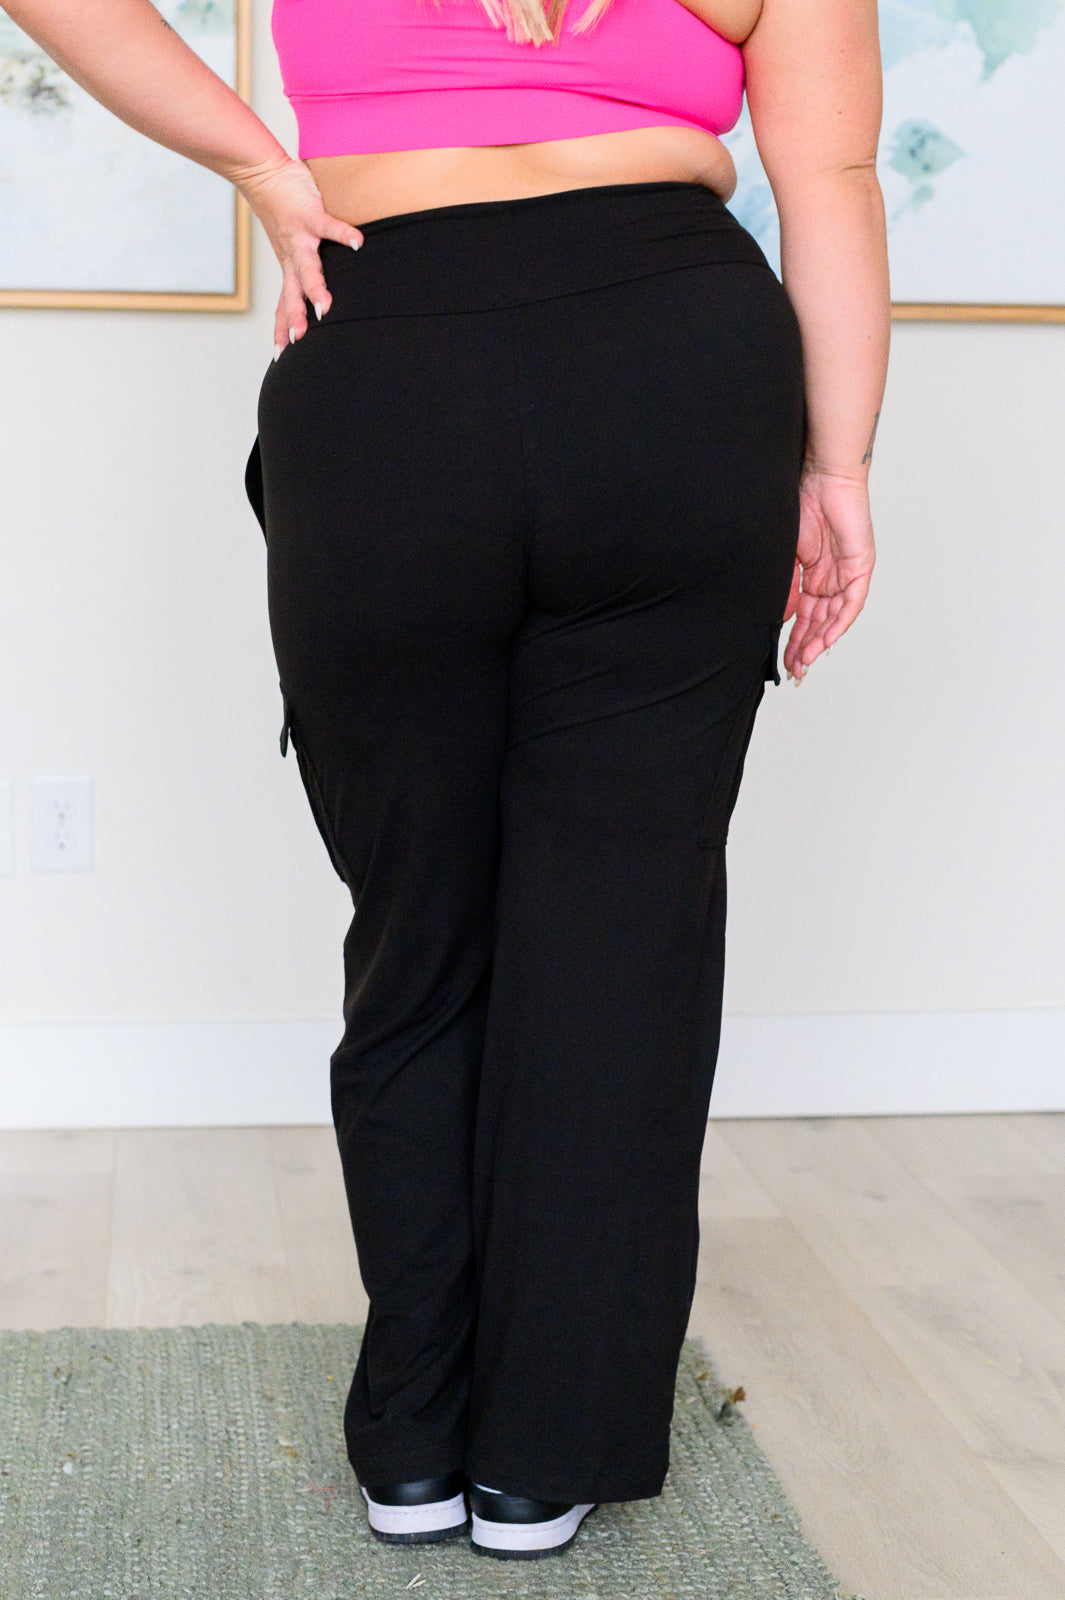 Race to Relax Cargo Pants in Black - Southern Divas Boutique